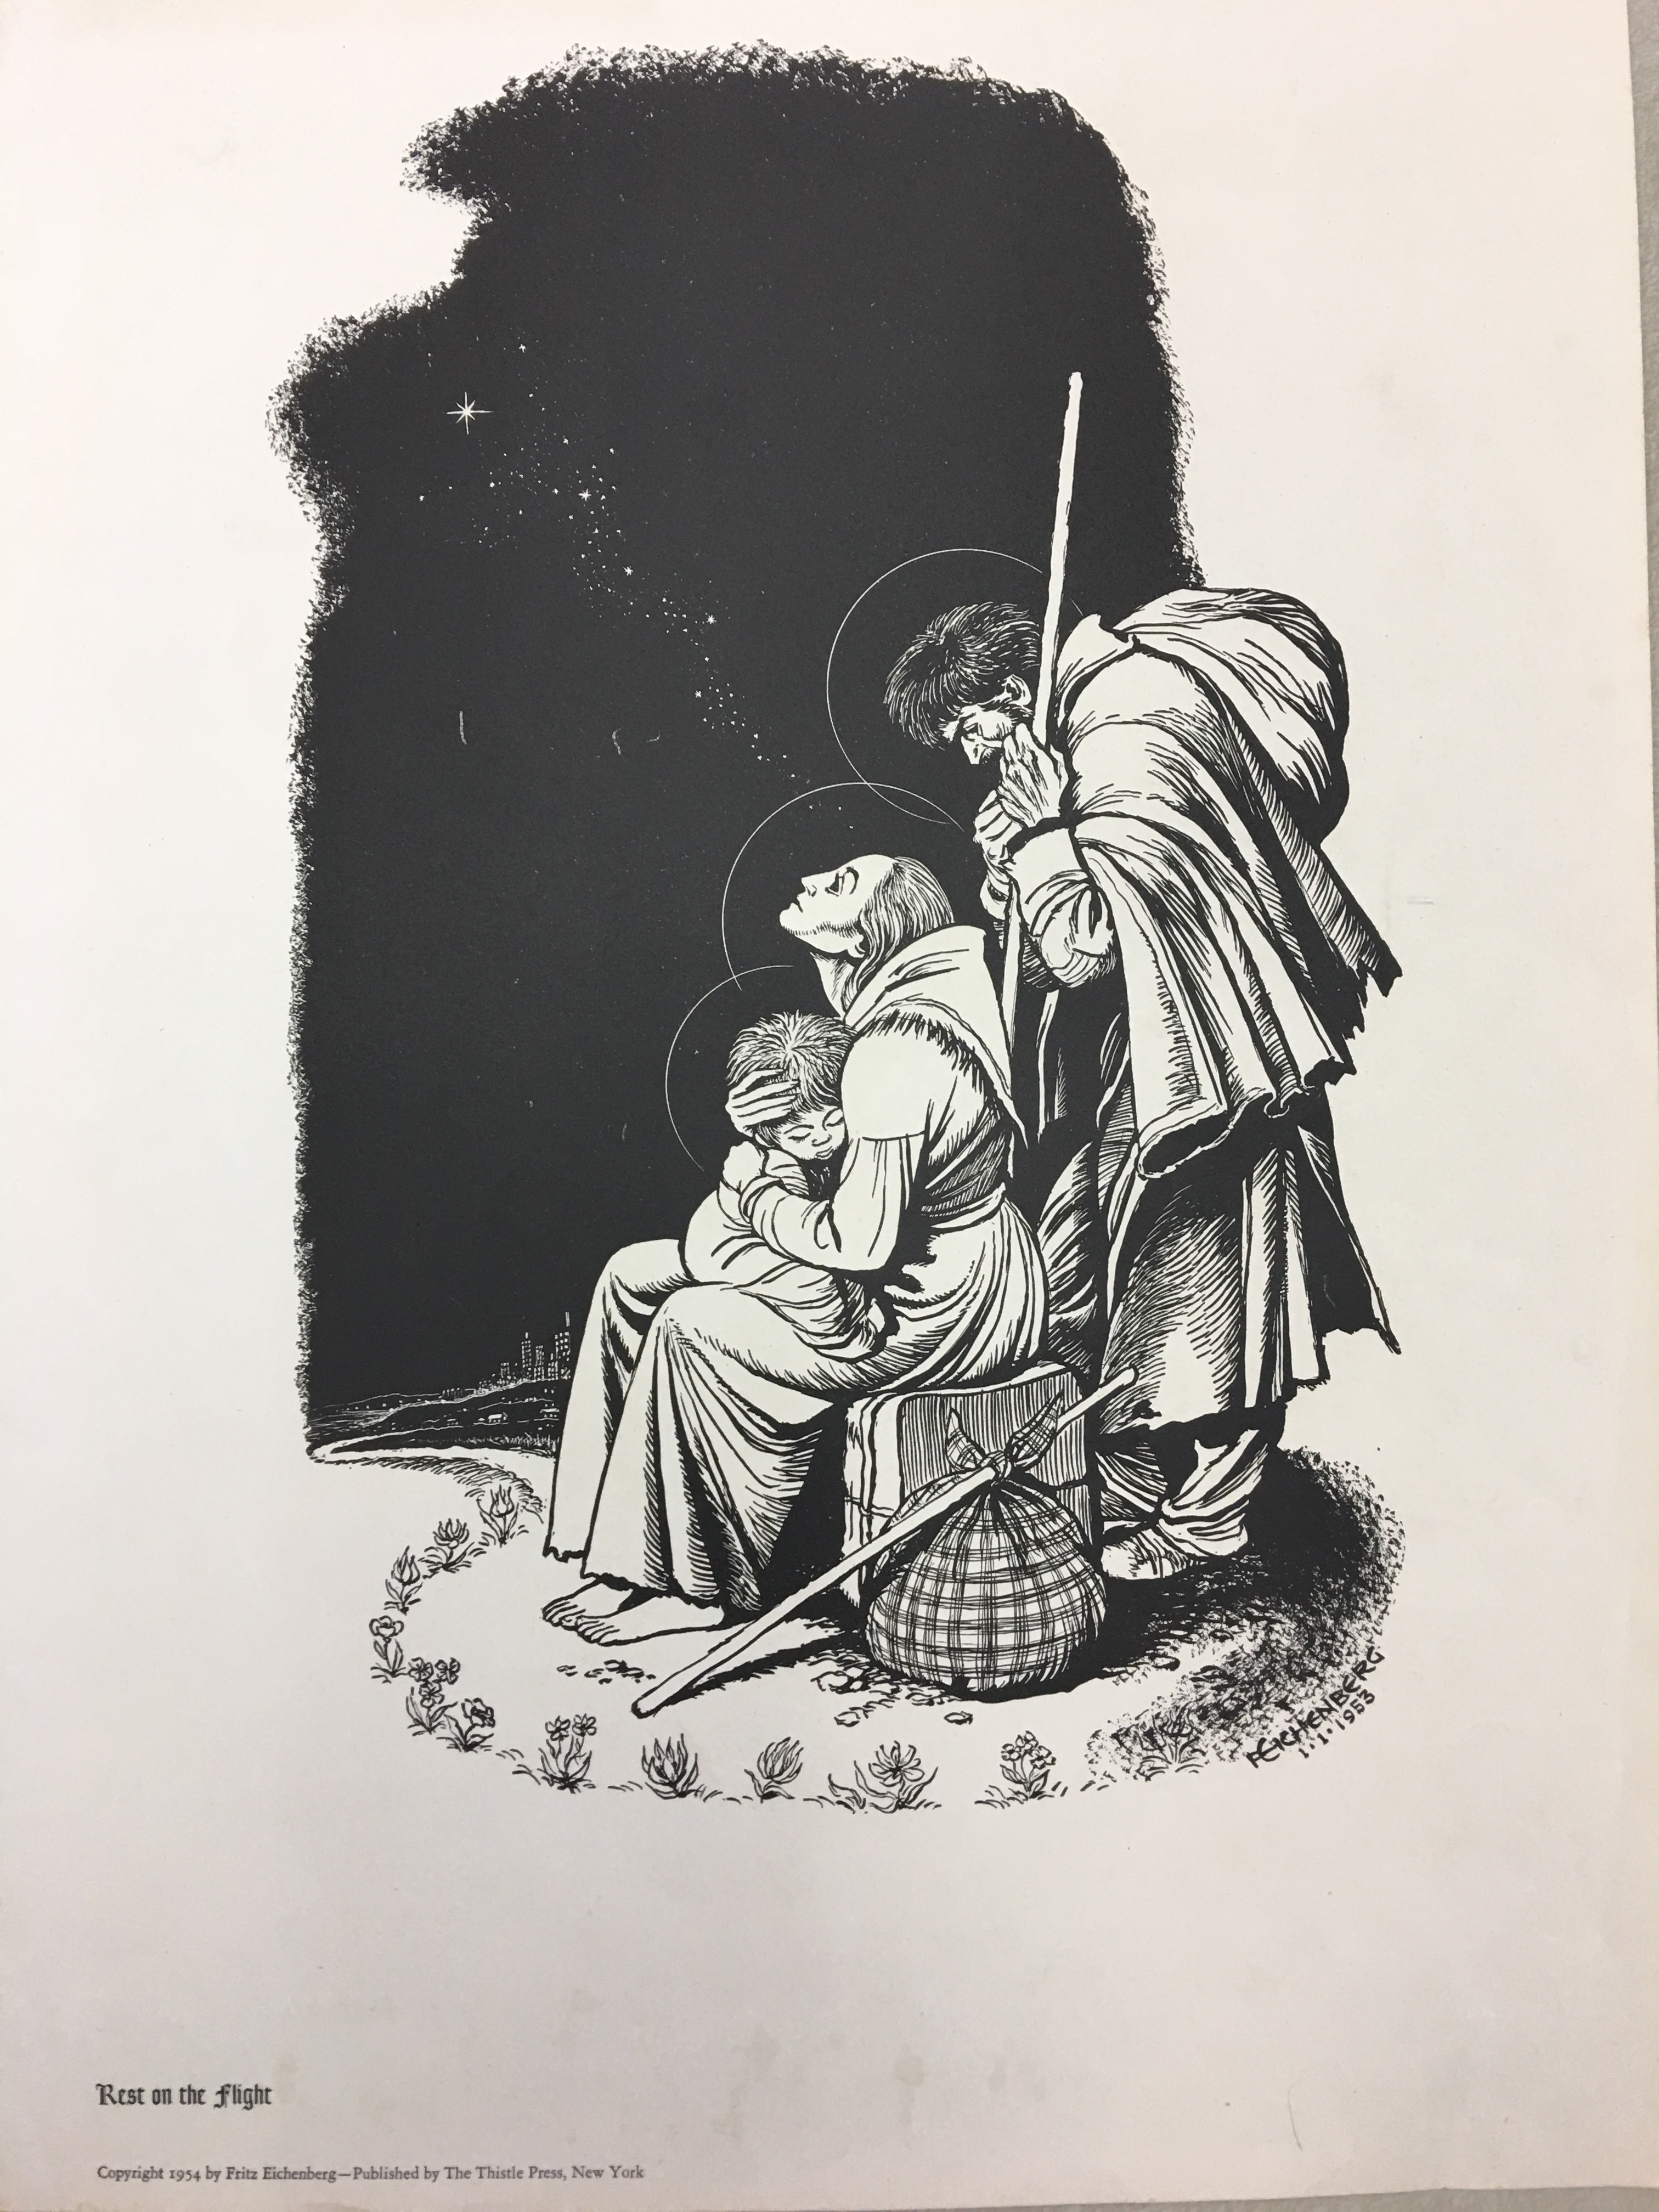 “Rest on the Flight”, by Fritz Eichenberg, 1953, published by the Thistle Press, New York, Copyright 1954. Marian Library Flat File Collection.